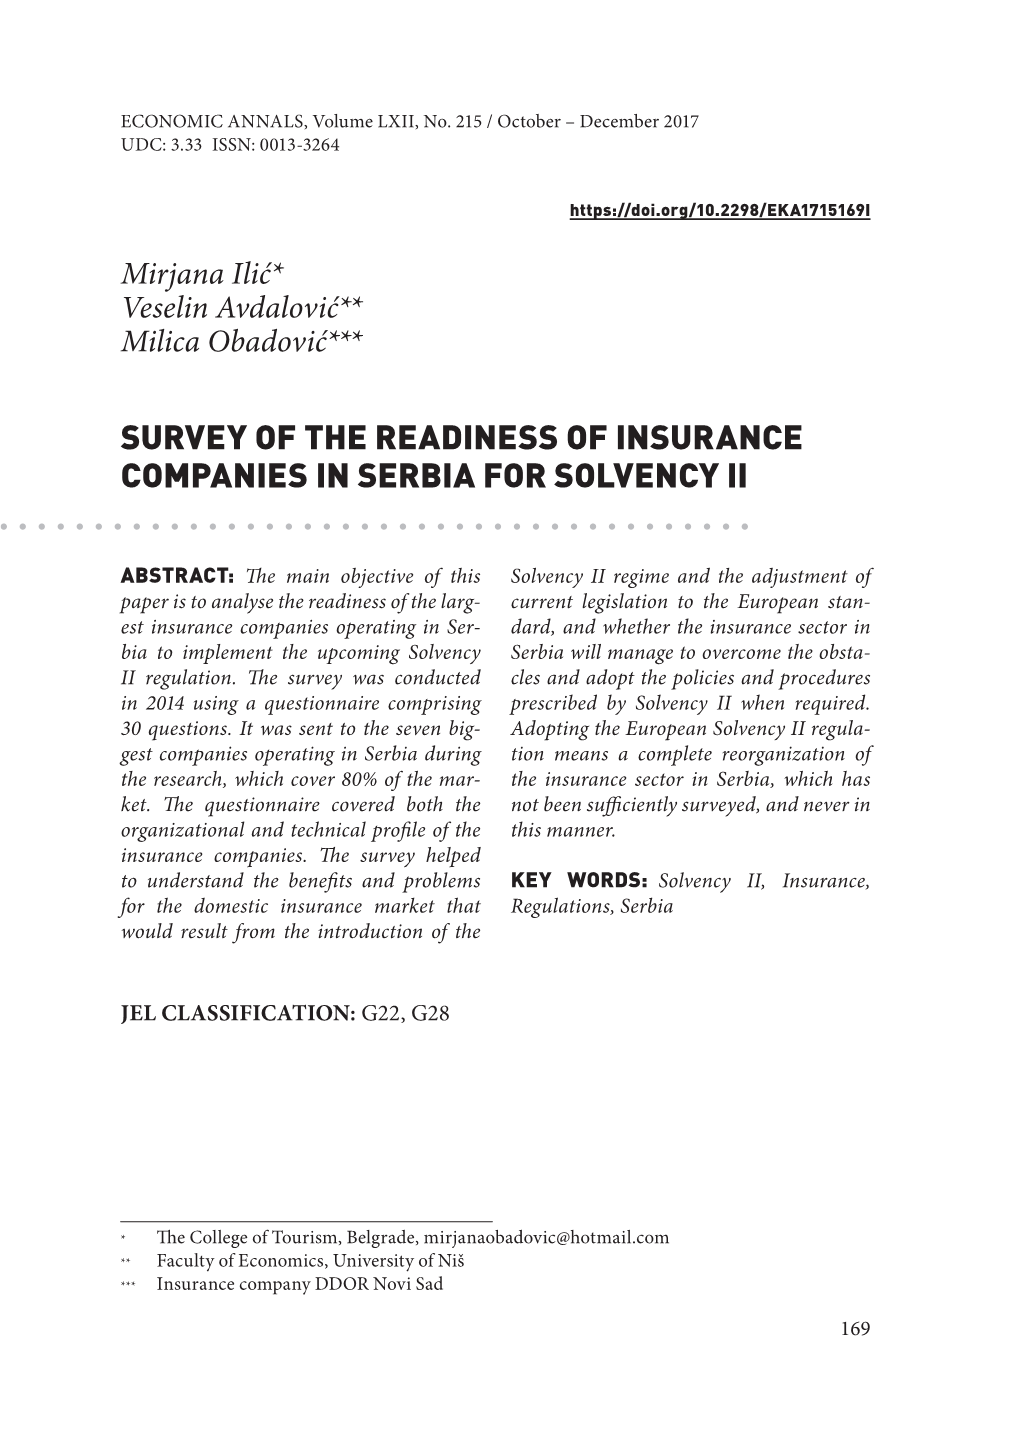 Survey of the Readiness of Insurance Companies in Serbia for Solvency Ii